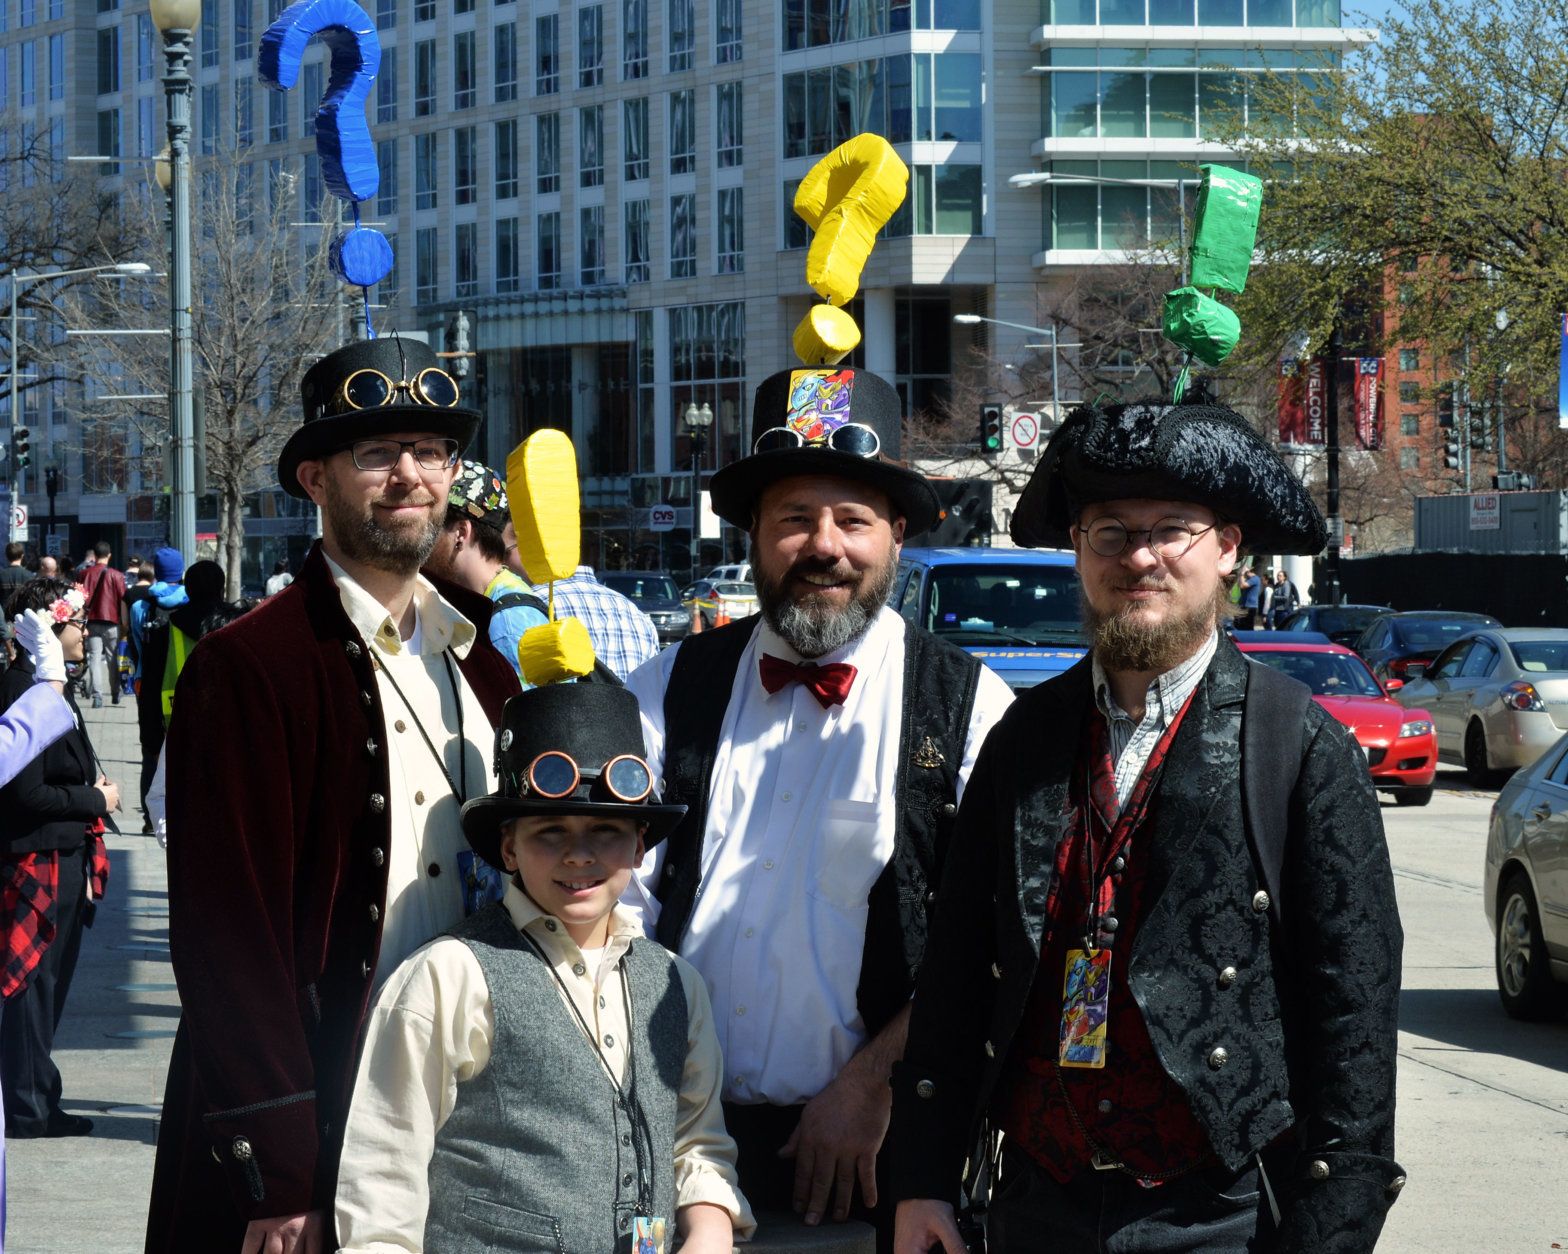 These Questplayers are non-playing characters who invite passersby to go on quests at Awesome Con 2018 at the Walter E. Washington Convention Center in Washington, D.C. (Shannon Finney)